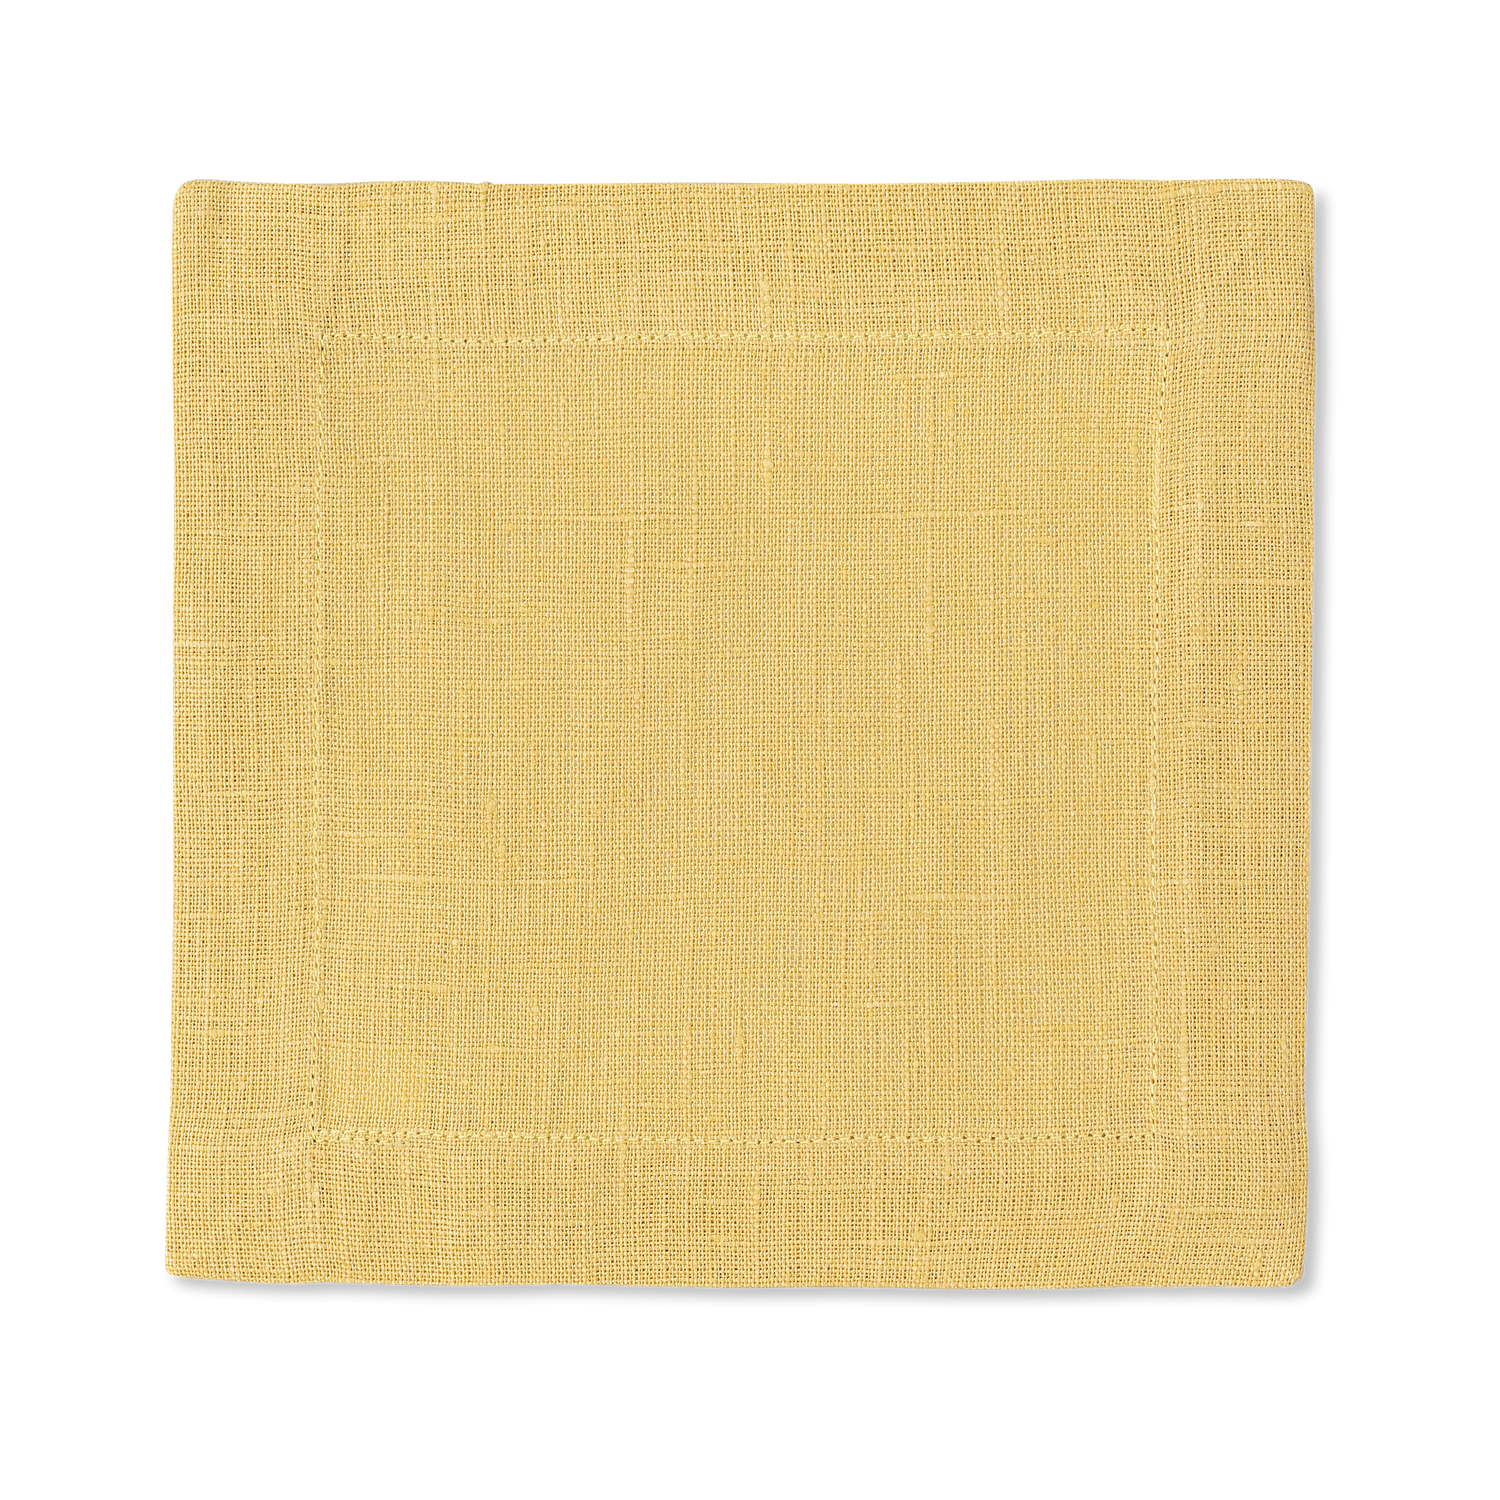 A square linen cocktail napkin in the color butter